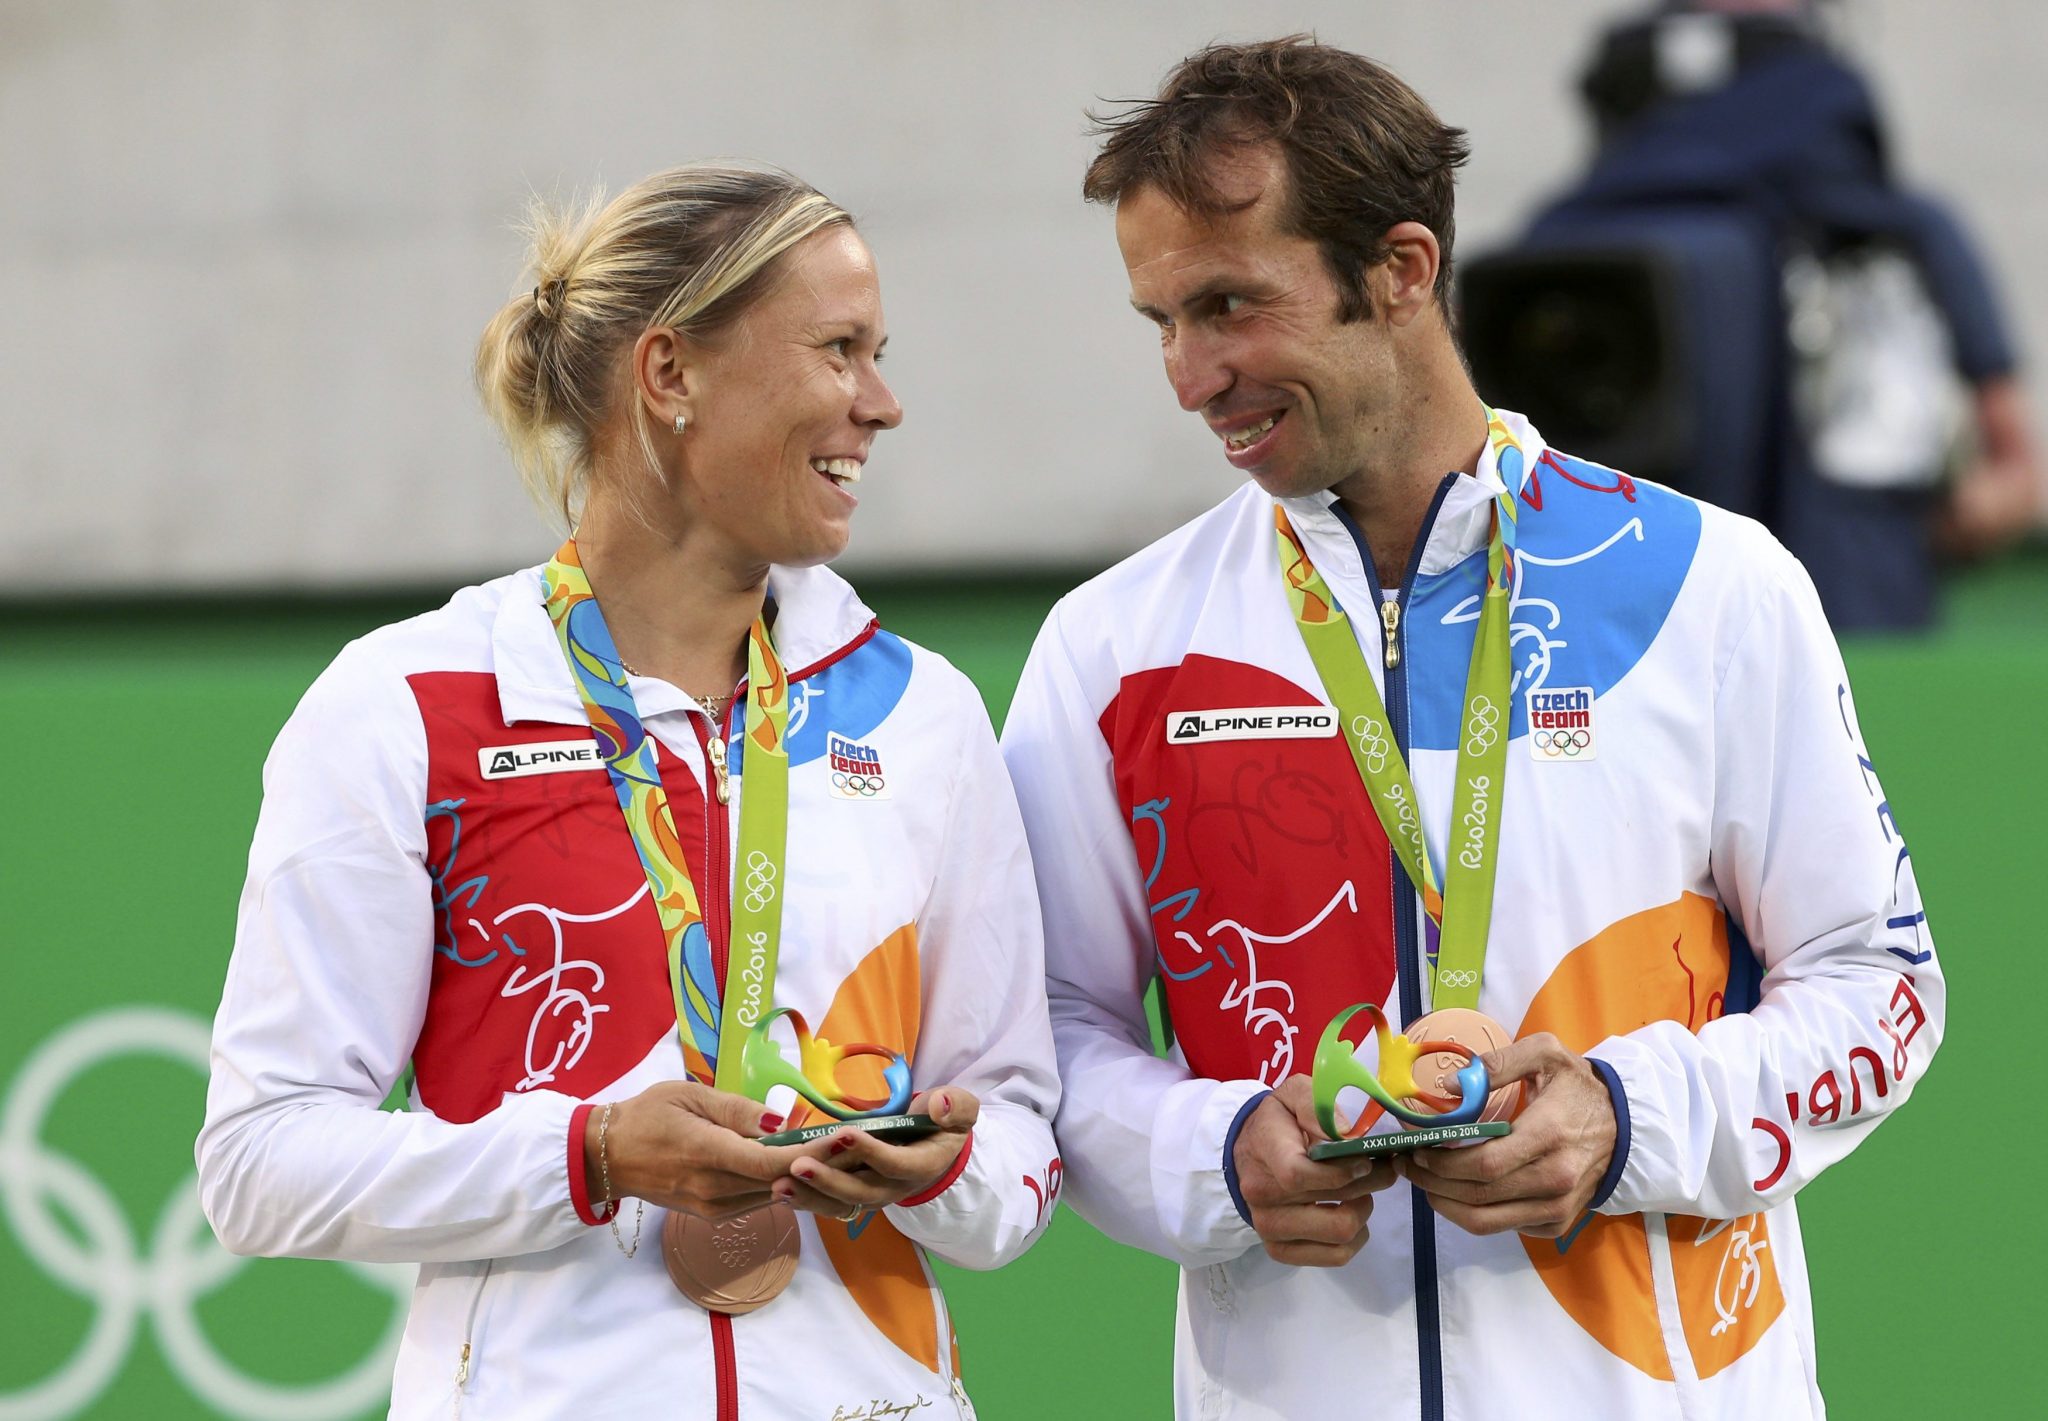 2016 Rio Olympics - Tennis - Victory Ceremony - Mixed Doubles Victory Ceremony - Olympic Tennis Centre - Rio de Janeiro, Brazil - 14/08/2016. Bronze medalists Radek Stepanek (CZE) of Czech Republic and Lucie Hradecka (CZE) of Czech Republic react after receiving their medals. REUTERS/Kevin Lamarque  FOR EDITORIAL USE ONLY. NOT FOR SALE FOR MARKETING OR ADVERTISING CAMPAIGNS.